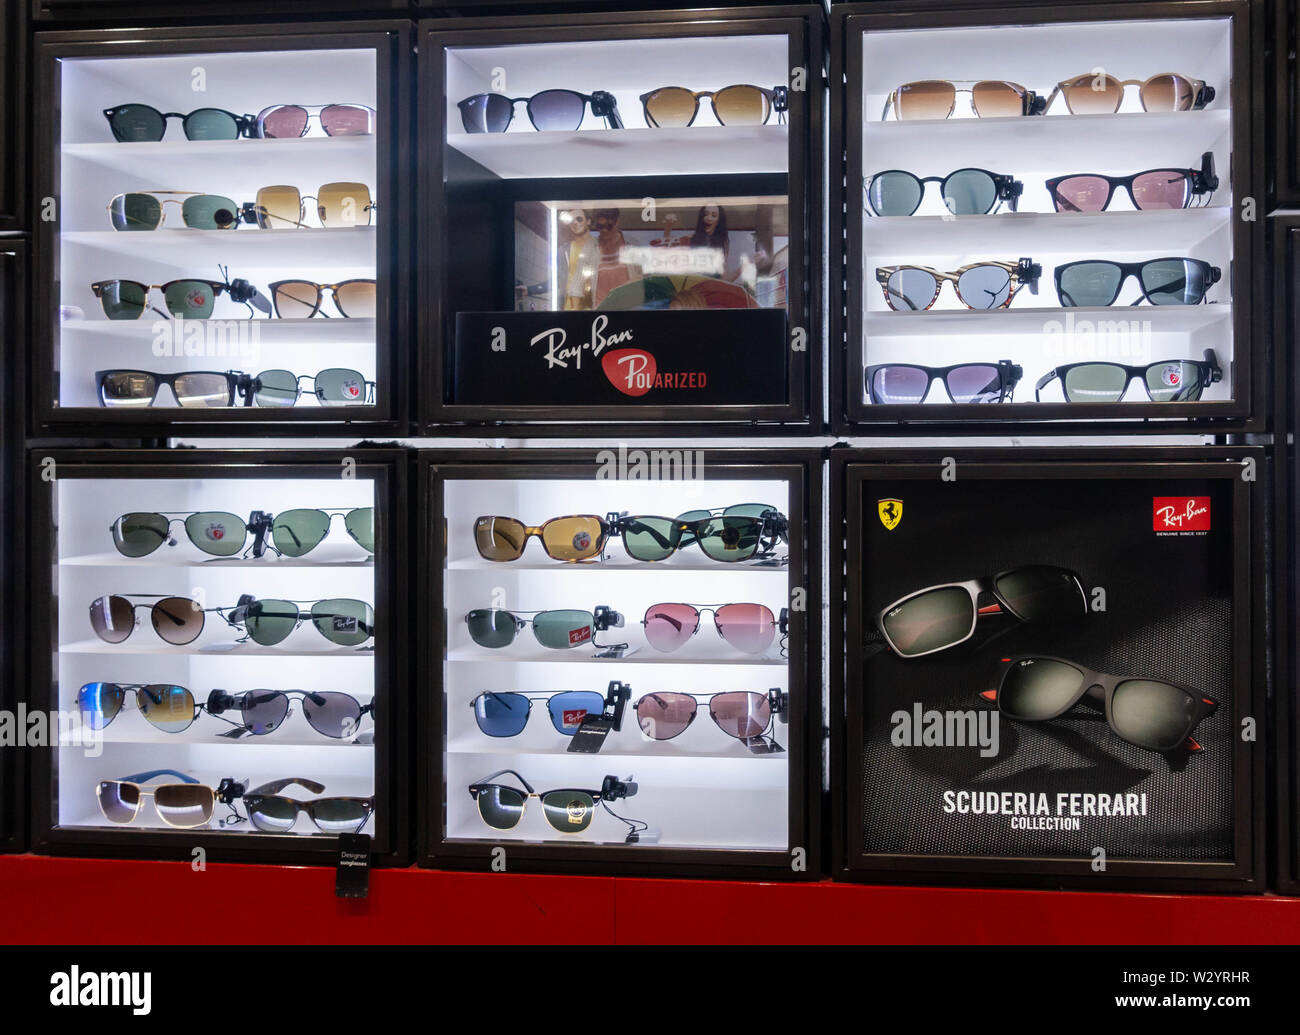 Ray Ban sunglasses display in airport duty free shop Stock Photo - Alamy